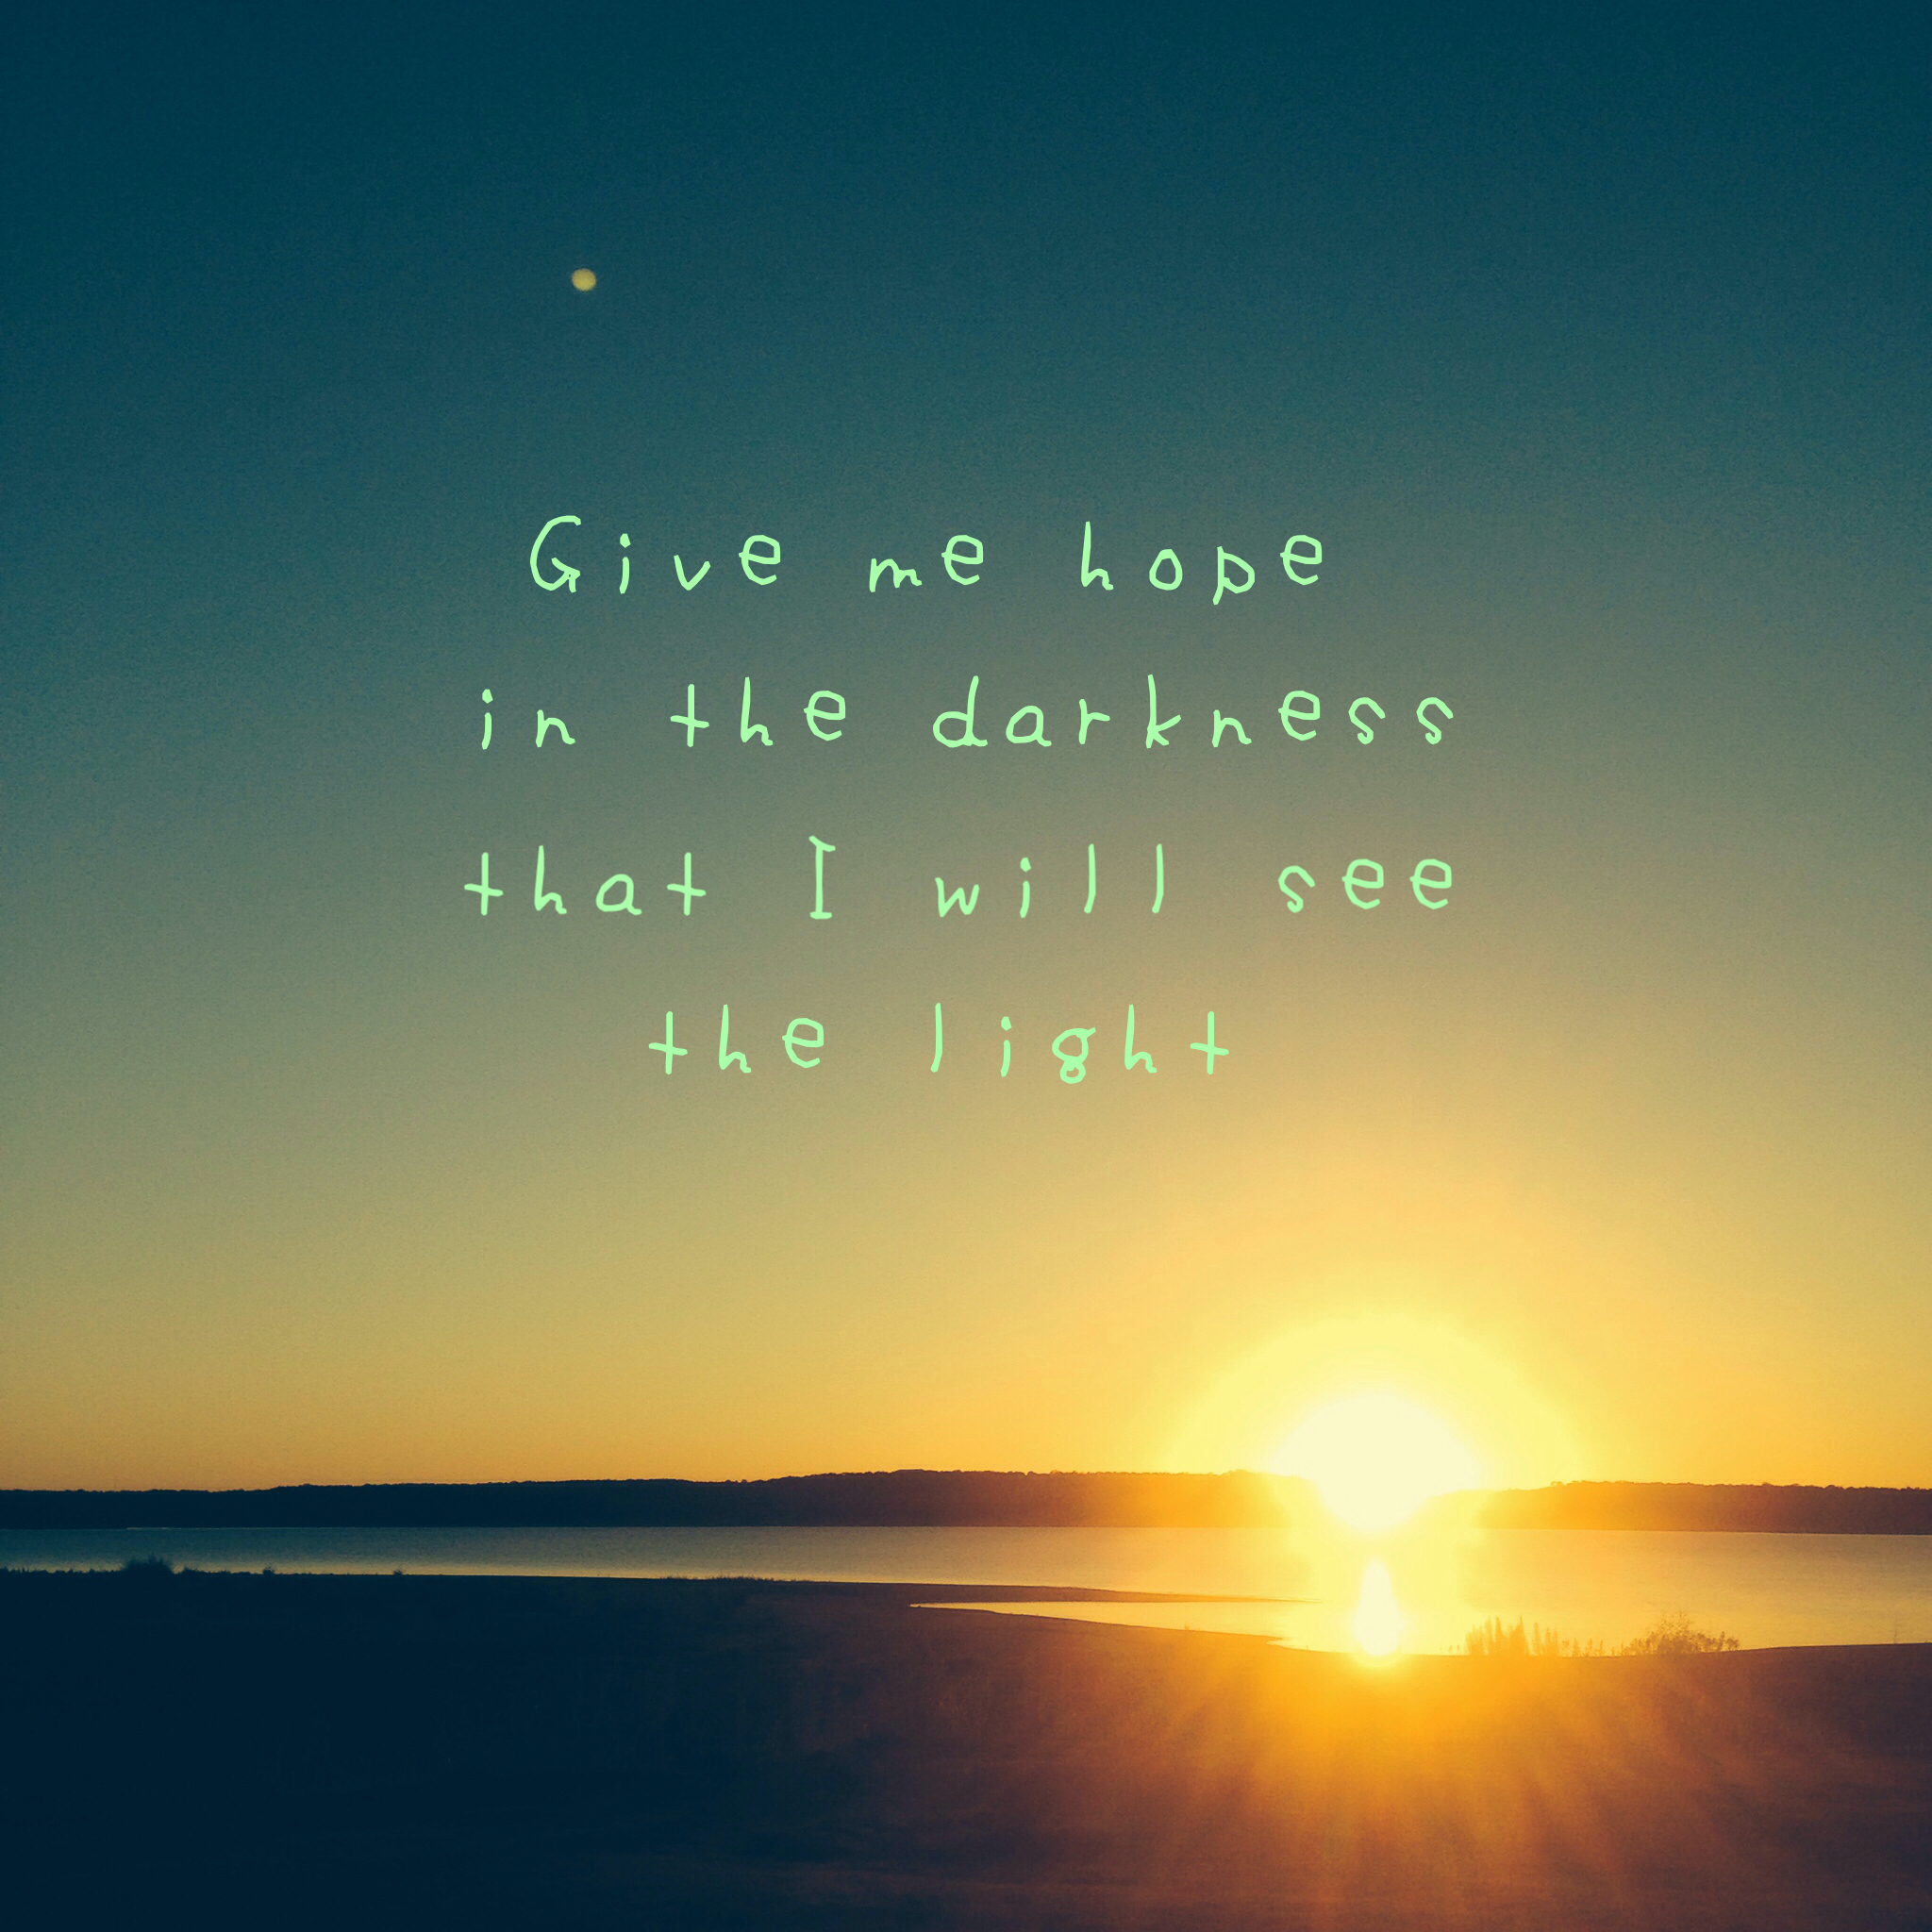 Light And Hope Quotes. QuotesGram